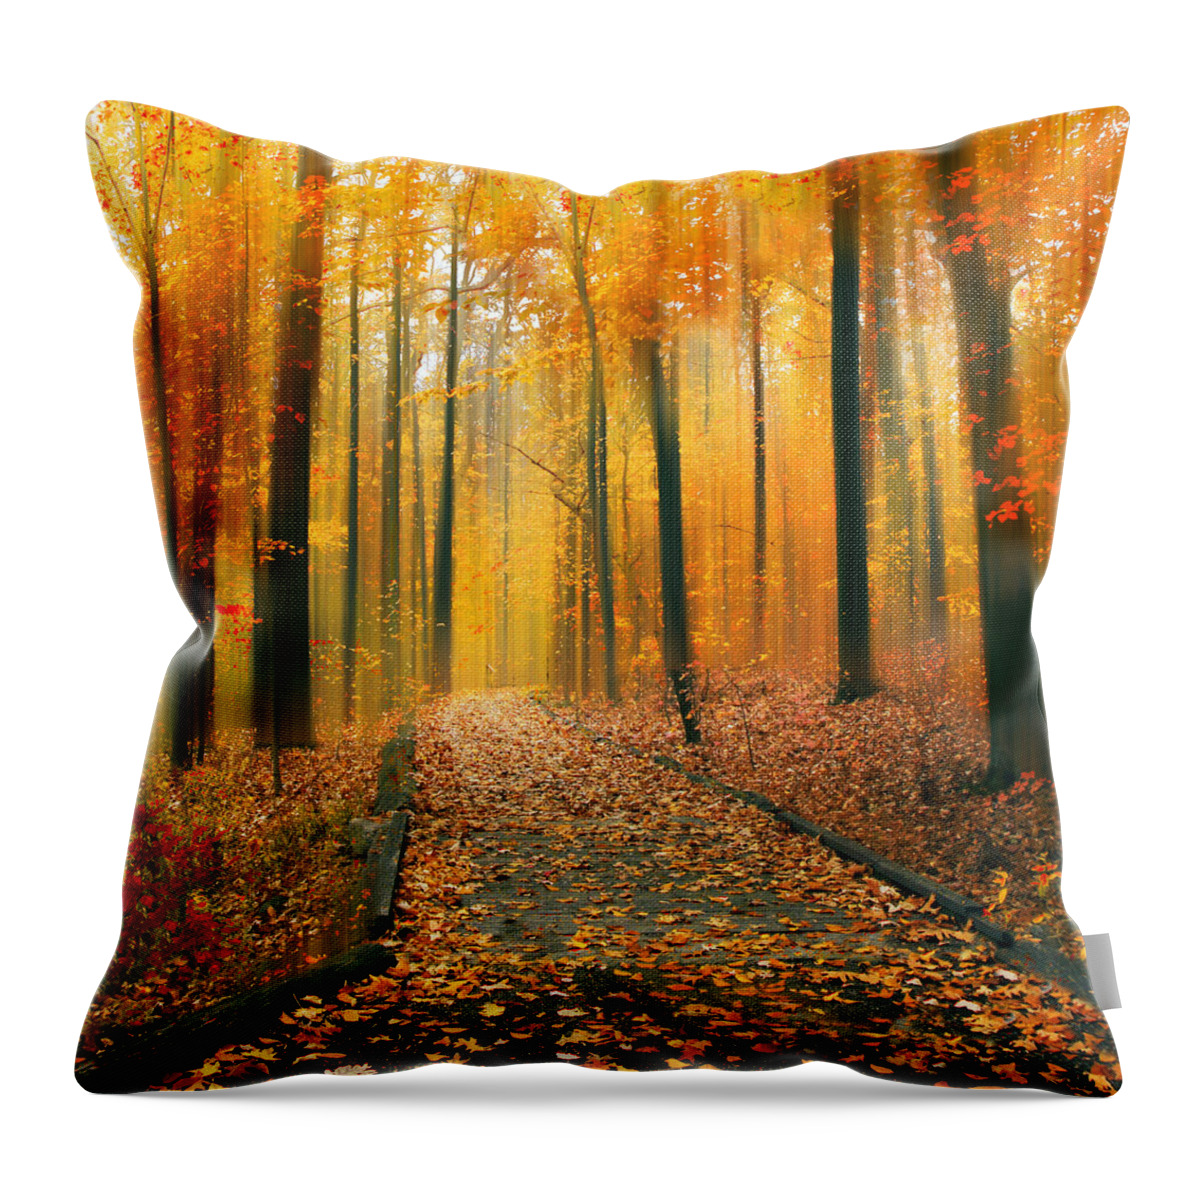 Autumn Throw Pillow featuring the photograph A Golden Passage by Jessica Jenney